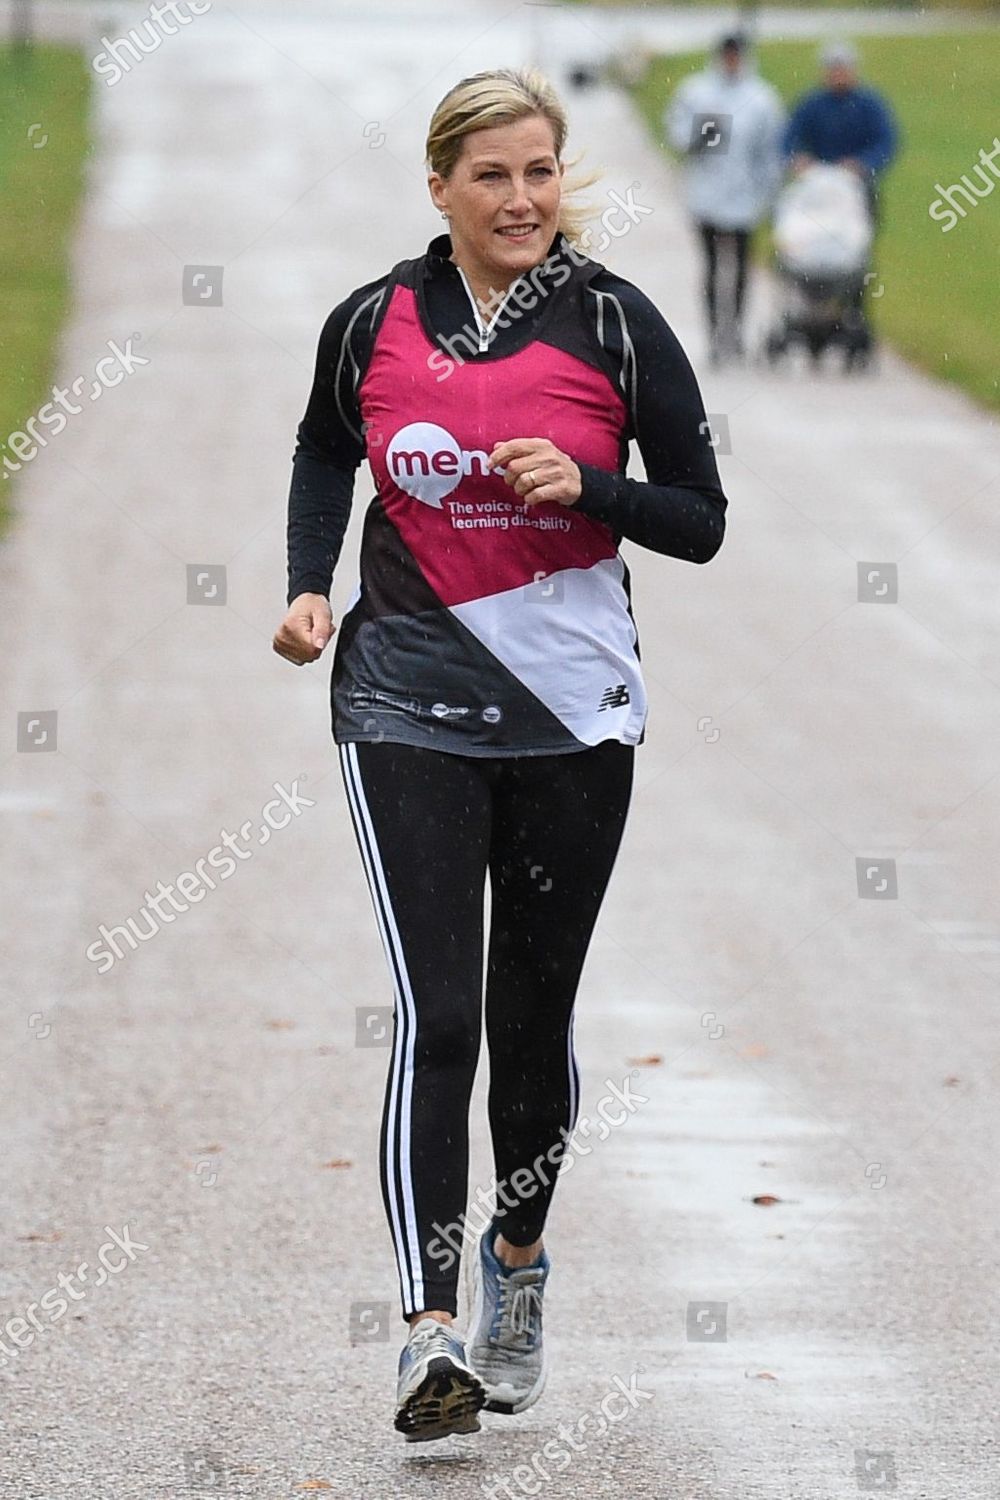 sophie-countess-of-wessex-joins-with-mencaps-learning-disability-running-team-windsor-uk-shutterstock-editorial-10876999q.jpg